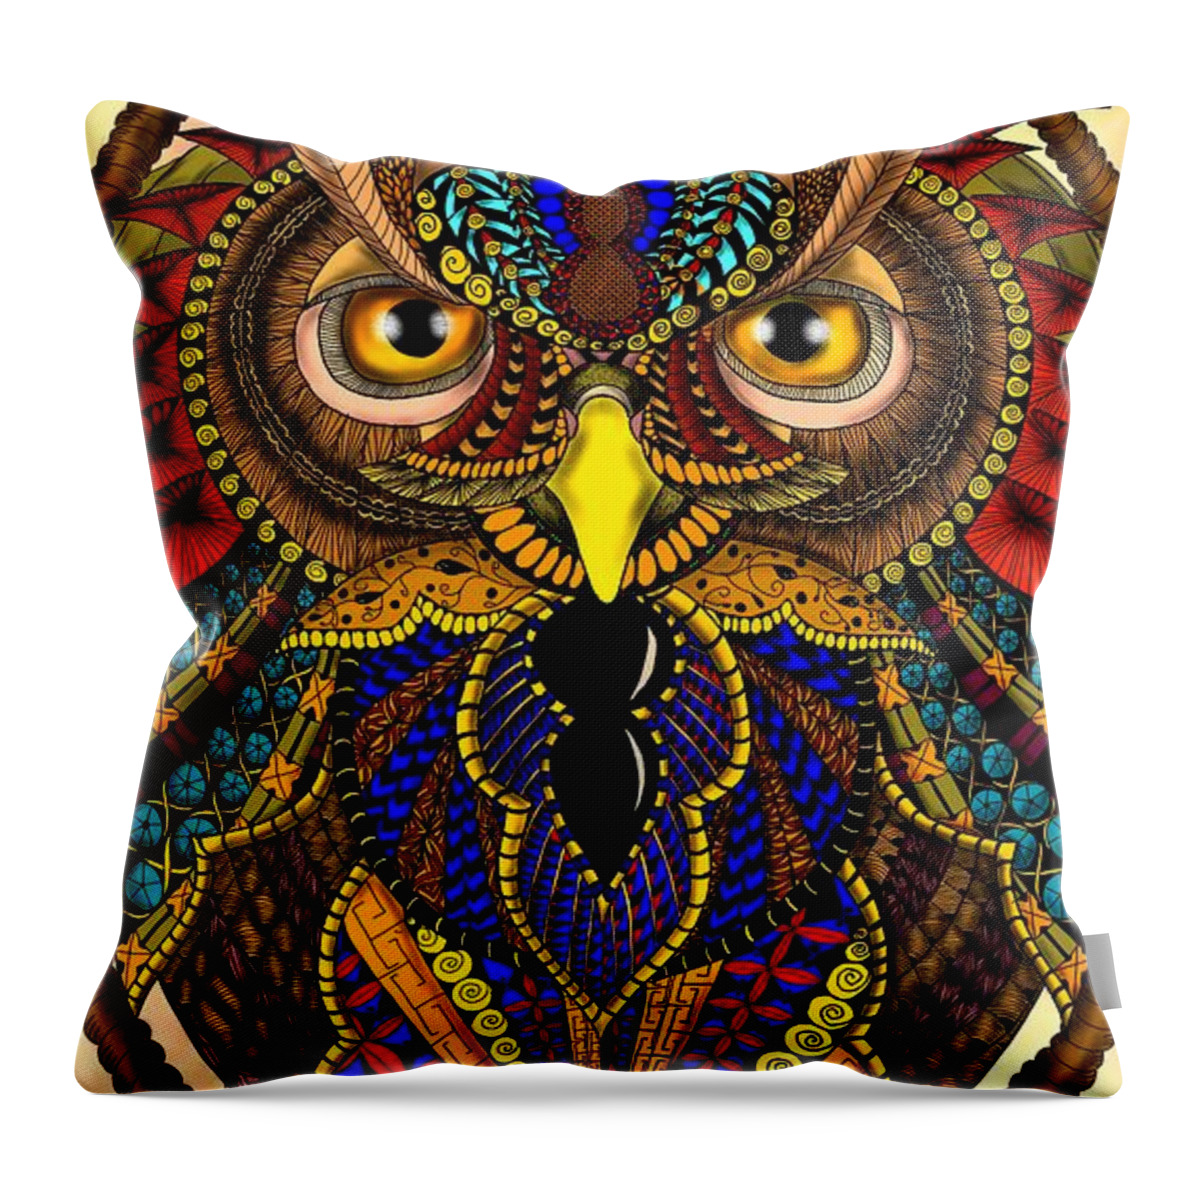 Ornate Owl Throw Pillow featuring the digital art Ornate Owl In Color by Becky Herrera